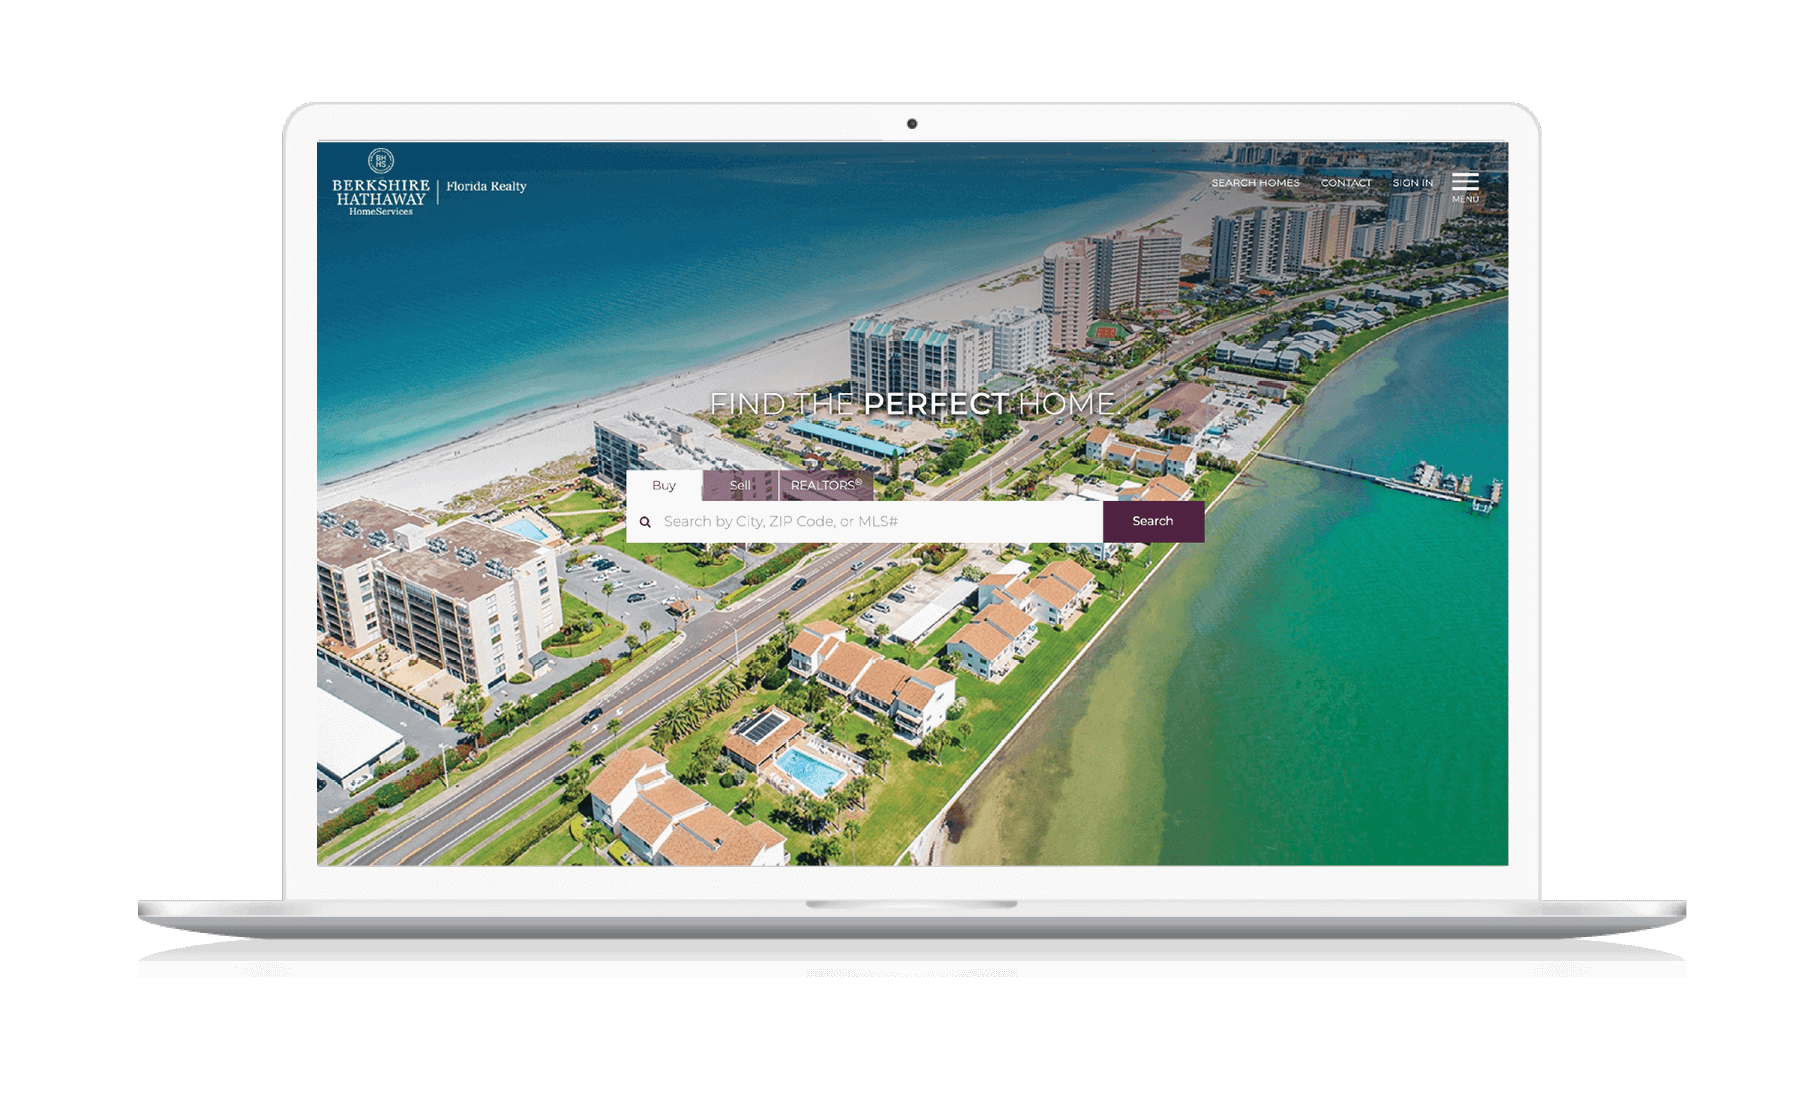 A laptop displaying the BHHS Florida Realty homepage, showing condos for sale on a beautiful barrier island in Florida.